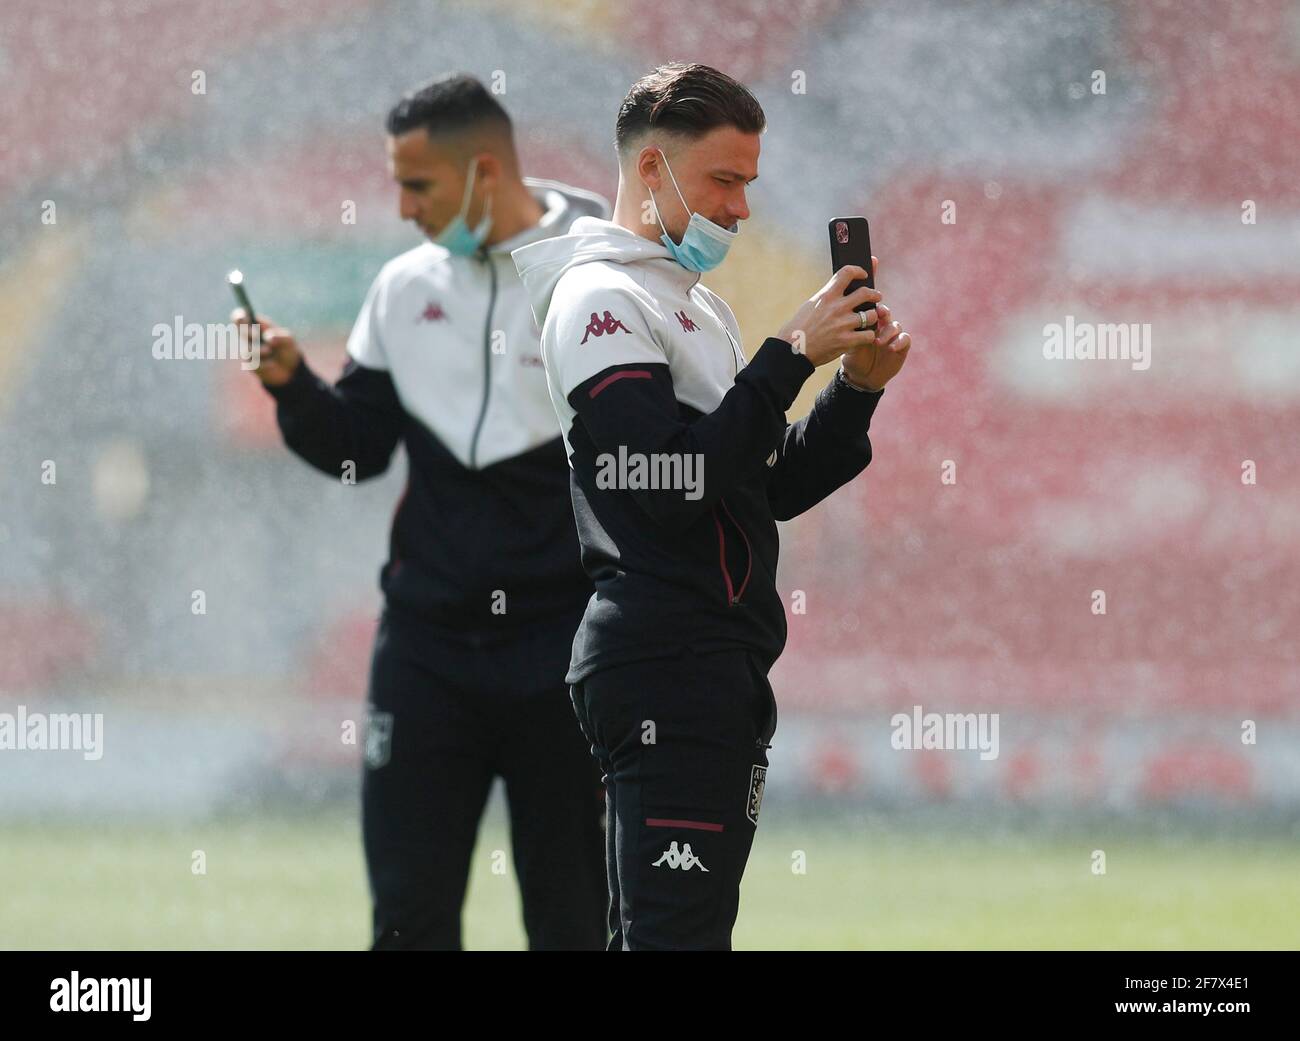 Liverpool, England, 10th April 2021. Matty Cash of Aston Villa takes pictures with his phone as he walks on the pitch before the Premier League match at Anfield, Liverpool. Picture credit should read: Darren Staples / Sportimage Credit: Sportimage/Alamy Live News Stock Photo